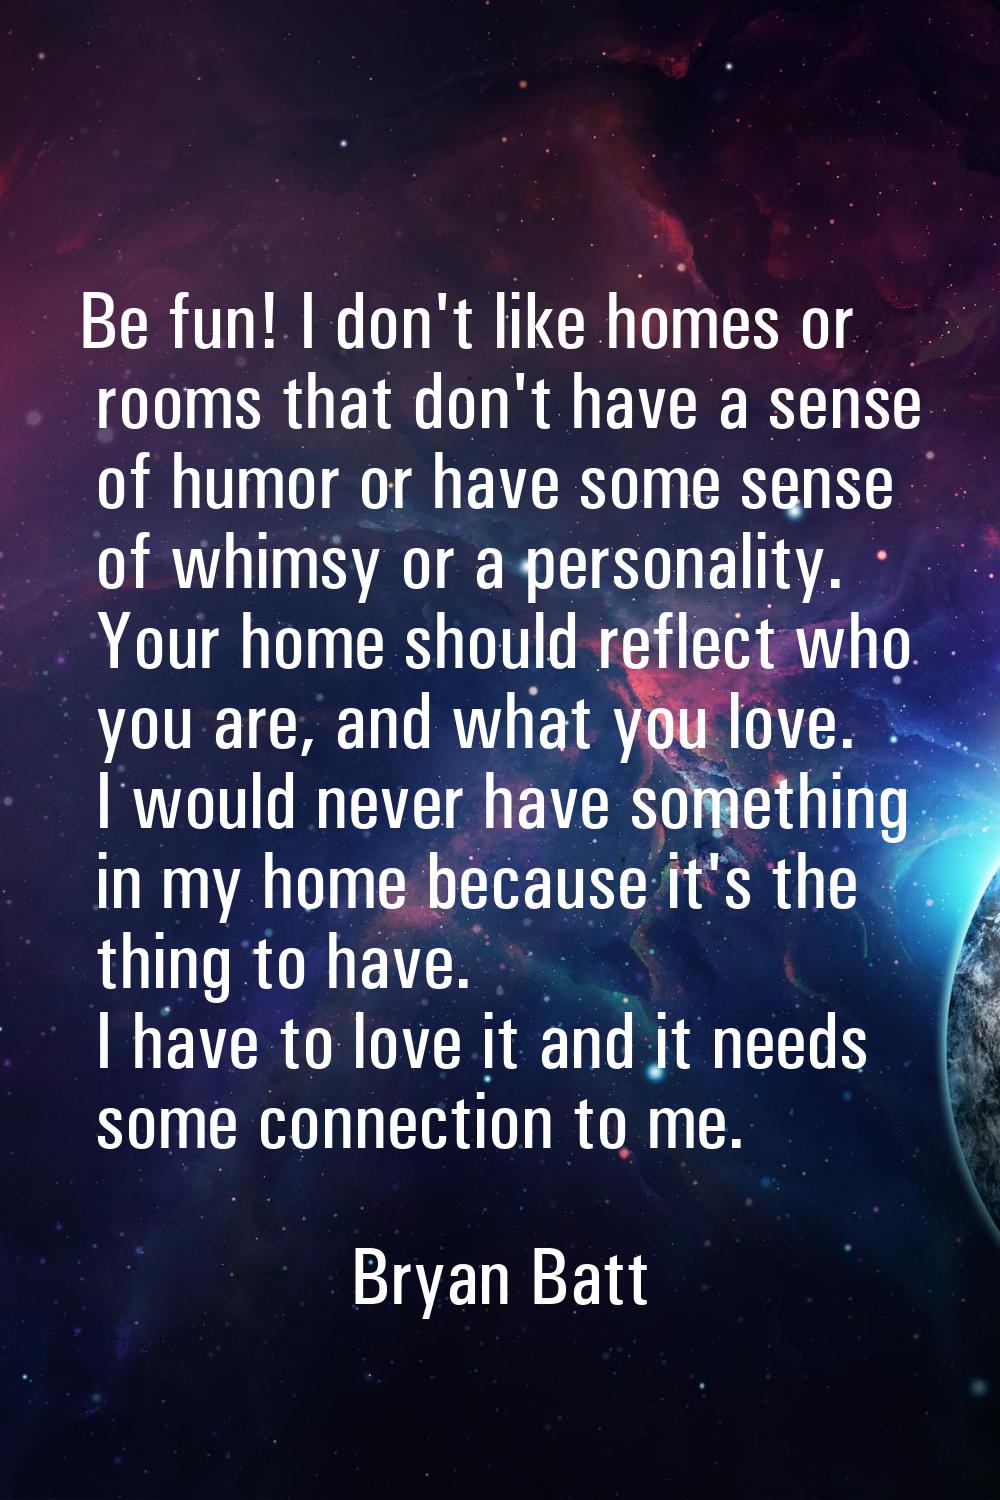 Be fun! I don't like homes or rooms that don't have a sense of humor or have some sense of whimsy o